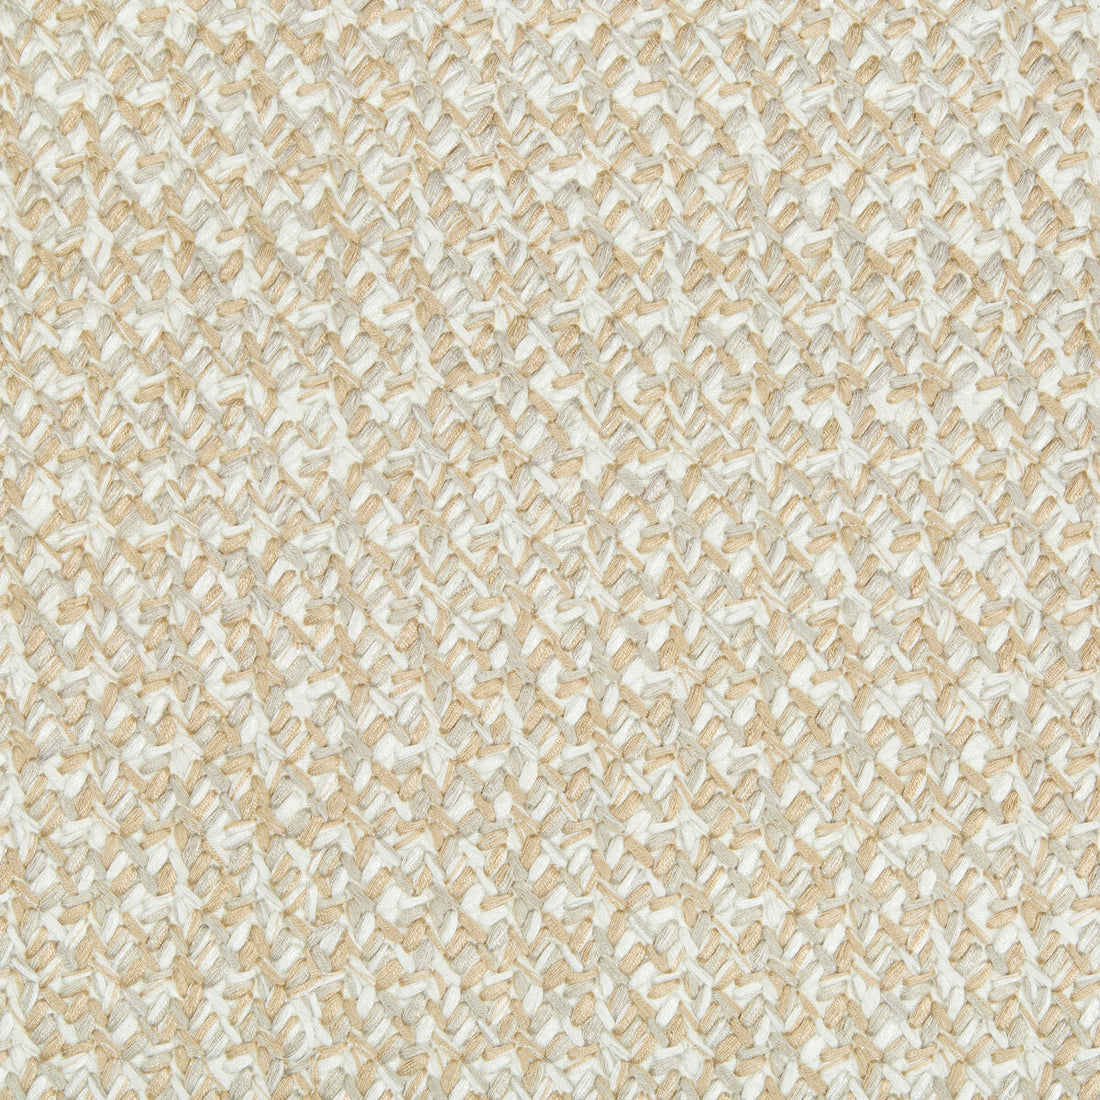 Lacing fabric in cashew color - pattern 34921.16.0 - by Kravet Couture in the Modern Tailor collection